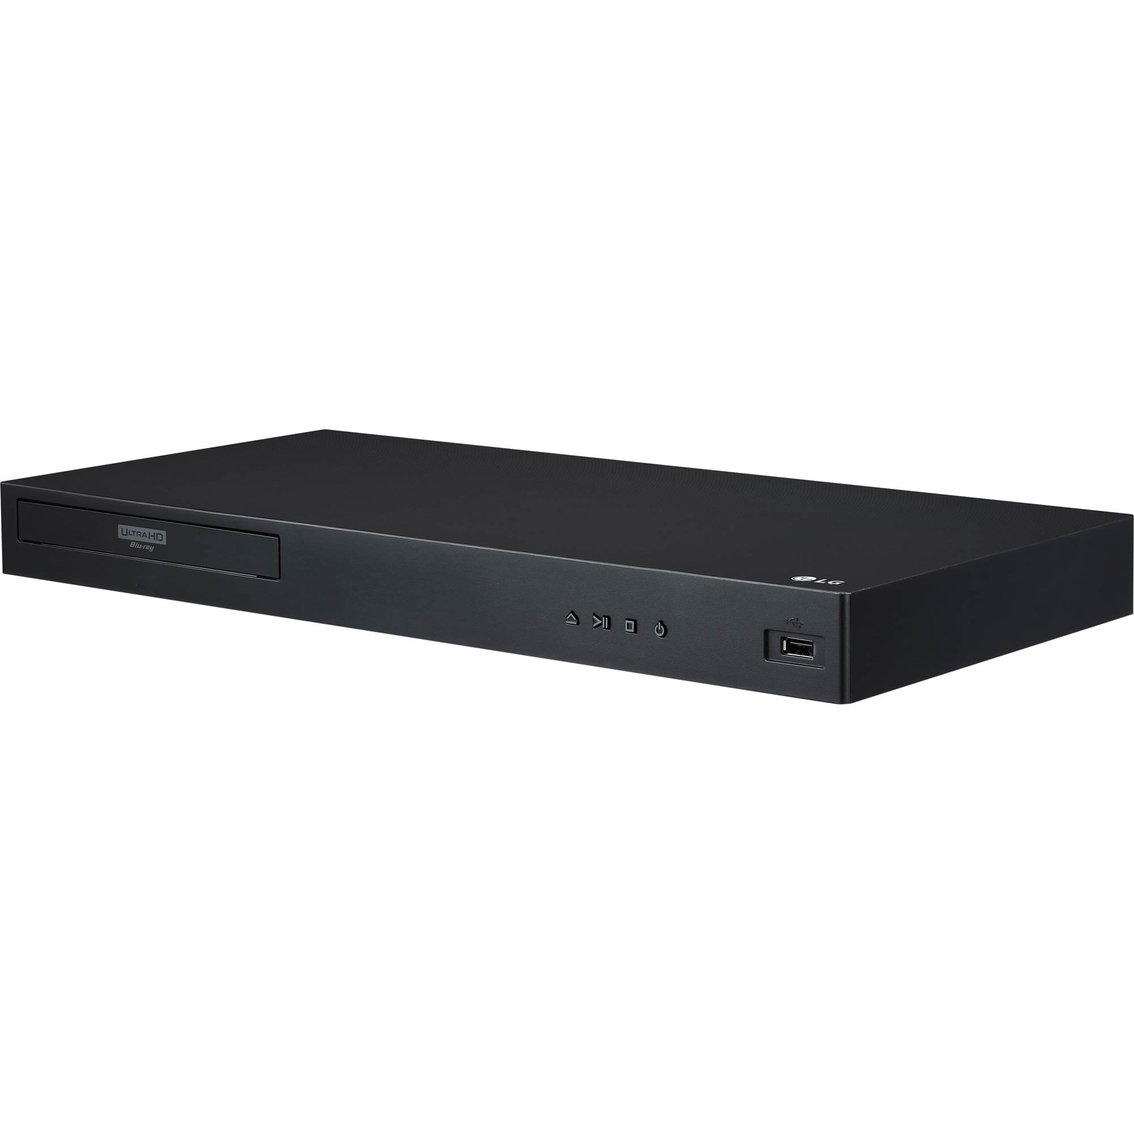 Lg Ubk90 4k Smart Blu-ray Disc Player With Dolby Vision | Video Players &  Recorders | Electronics | Shop The Exchange